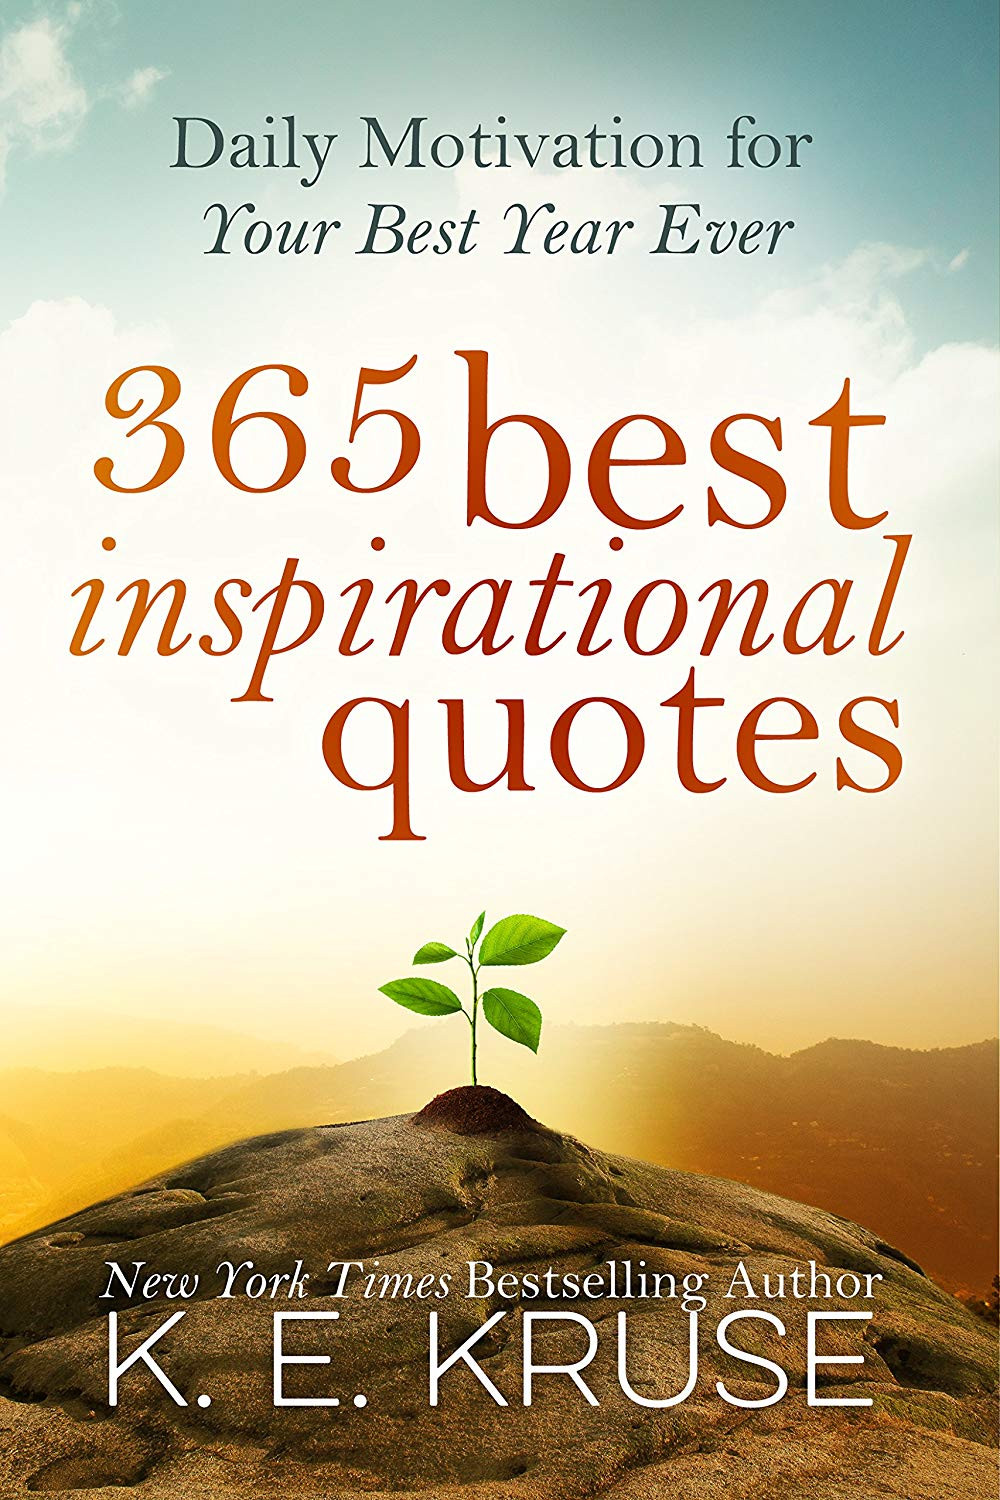 Positive Daily Quotes
 AMAZON KINDLE BOOK PROMOTION 365 Best Inspirational